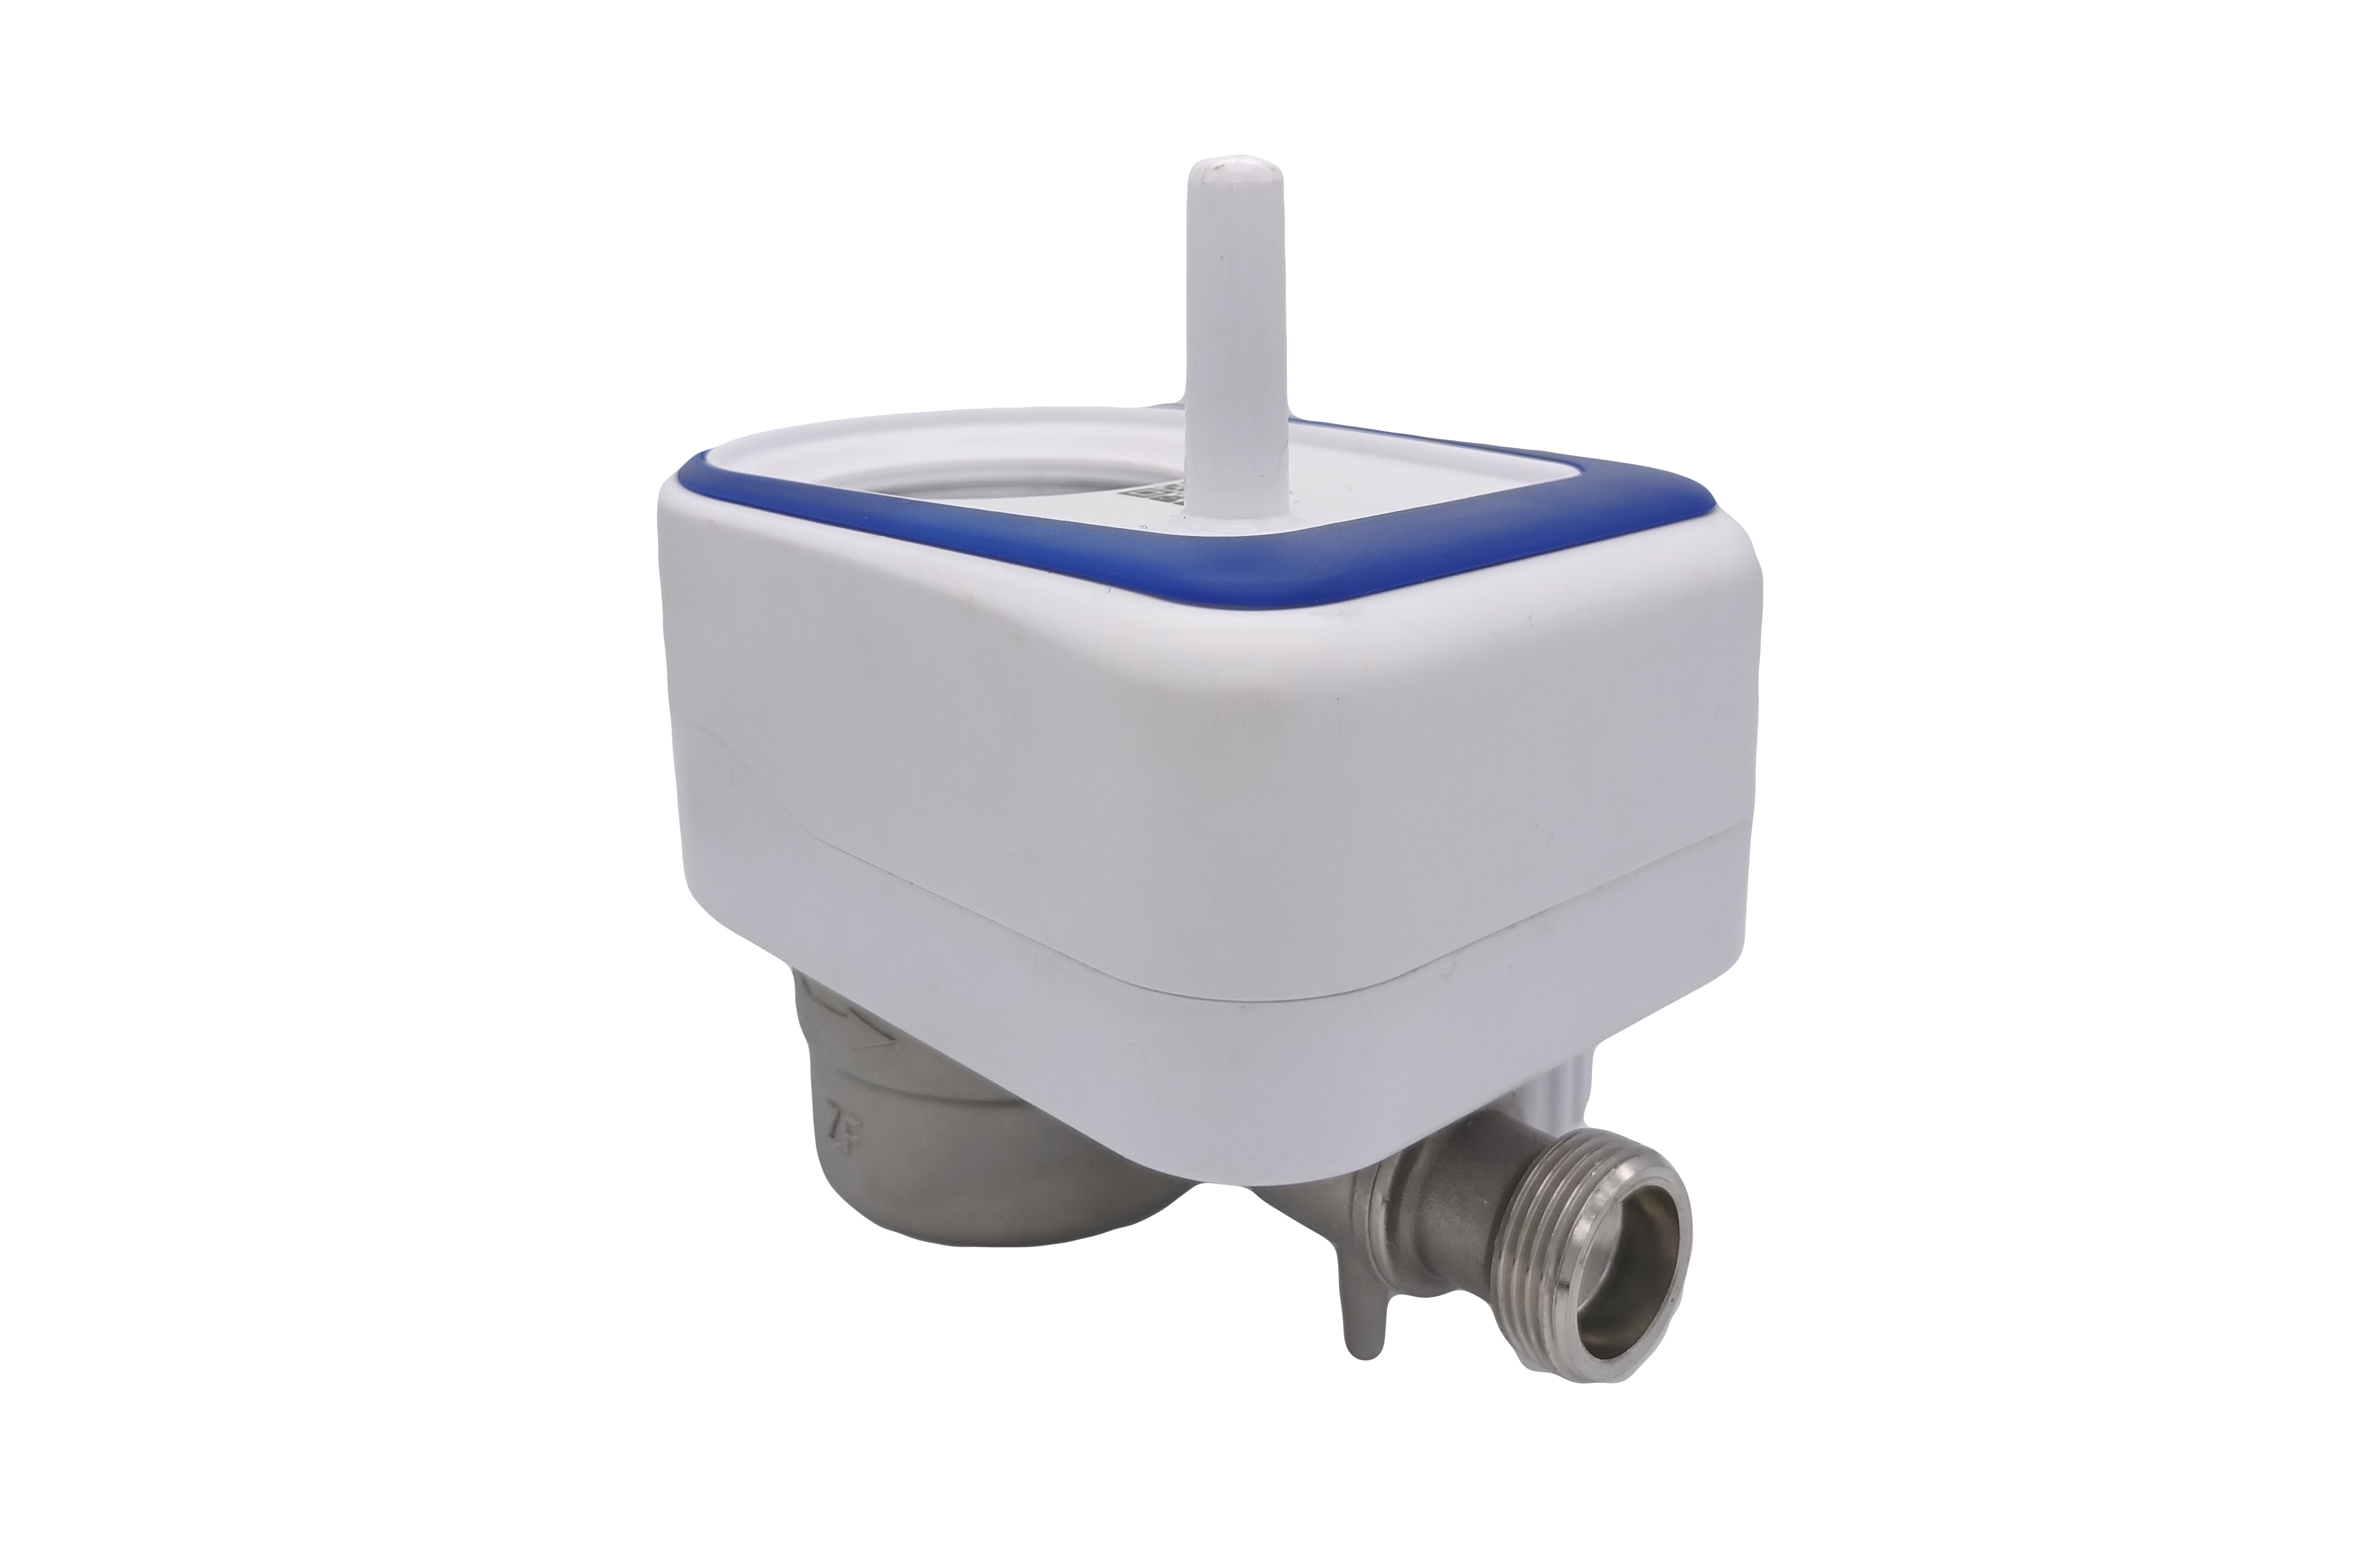 All electronic drinking cold water meter - wireless communication